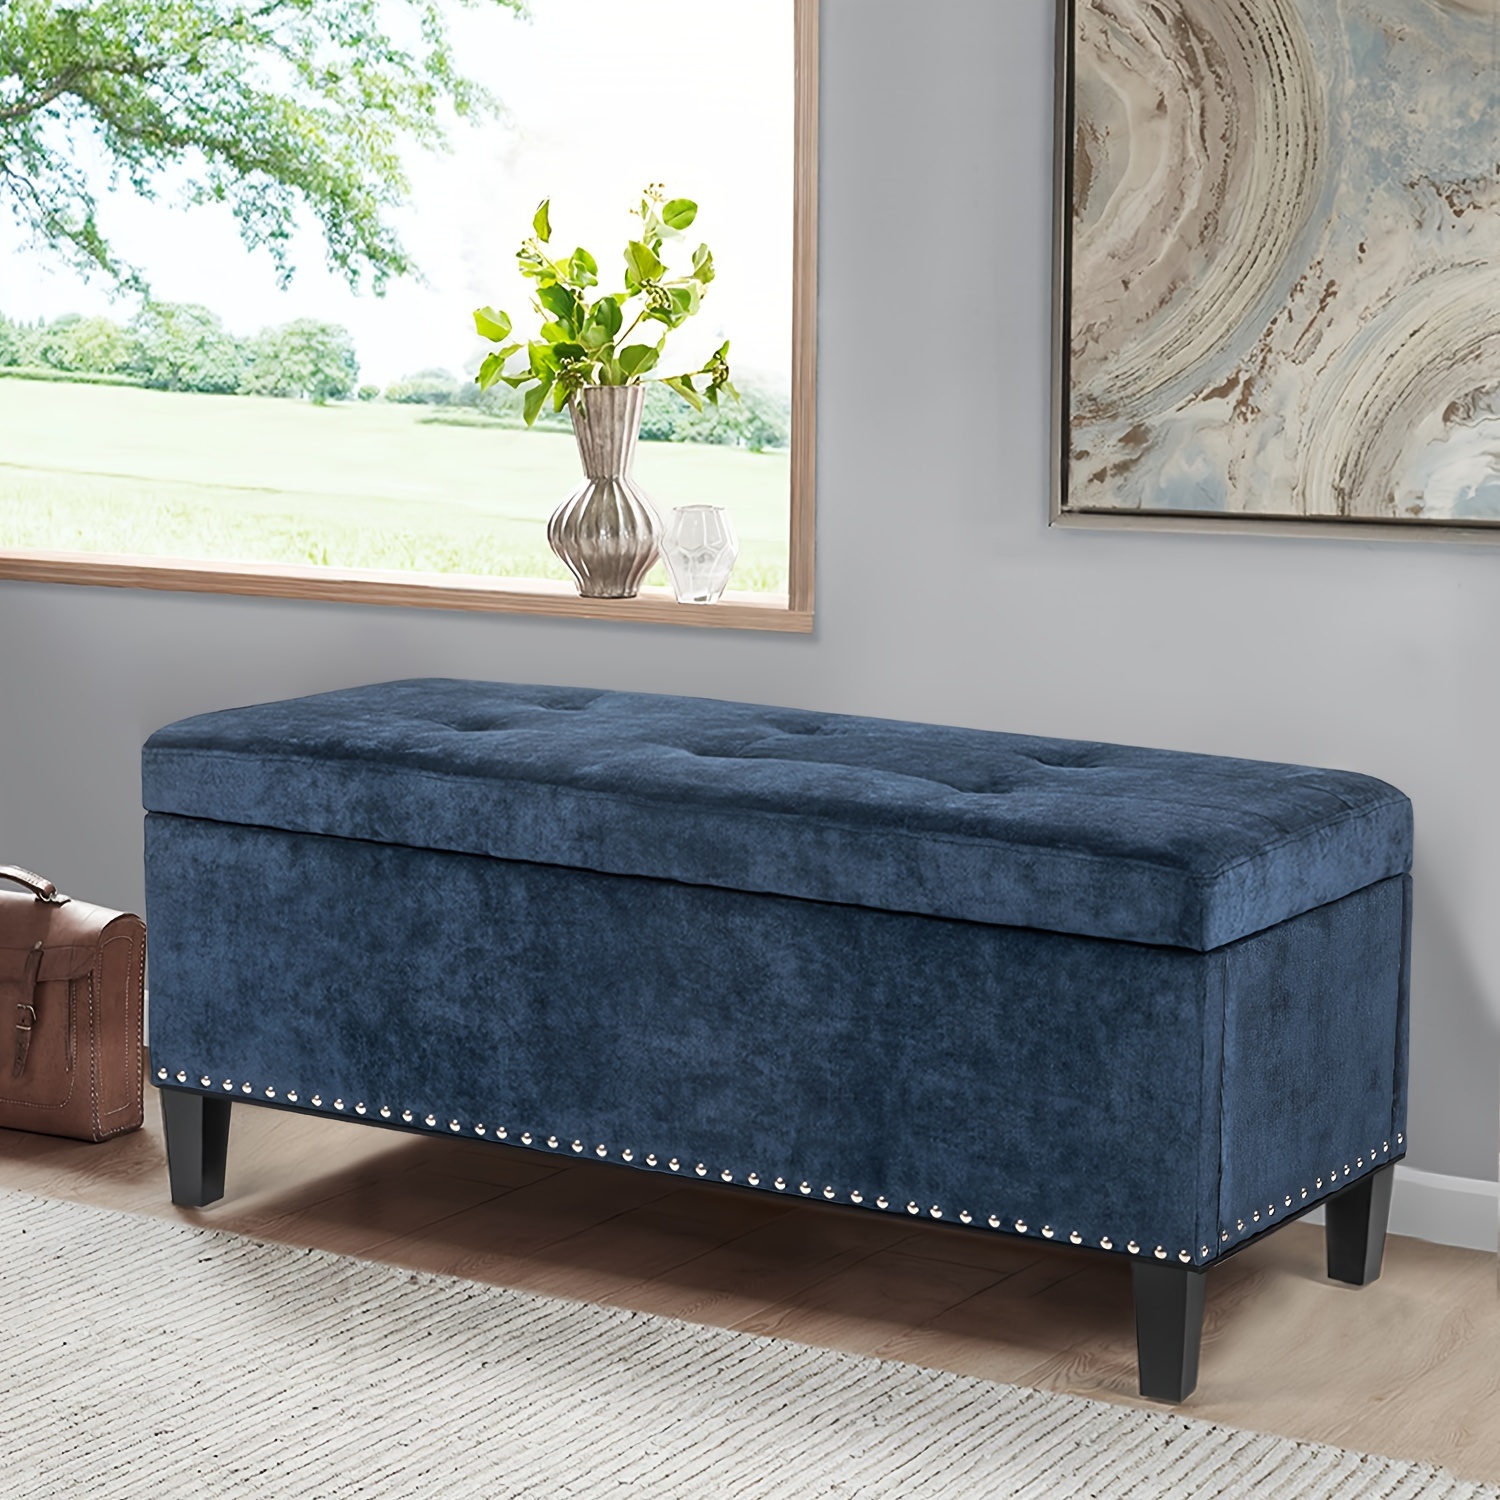 

Modern Rectangular Storage Ottoman, Velvet Tufted End Of Bed Bench With Rivet, Footrest Stool Coffee Table With Sturdy Legs For Living Room Bedroom Entryway, Need Assembly